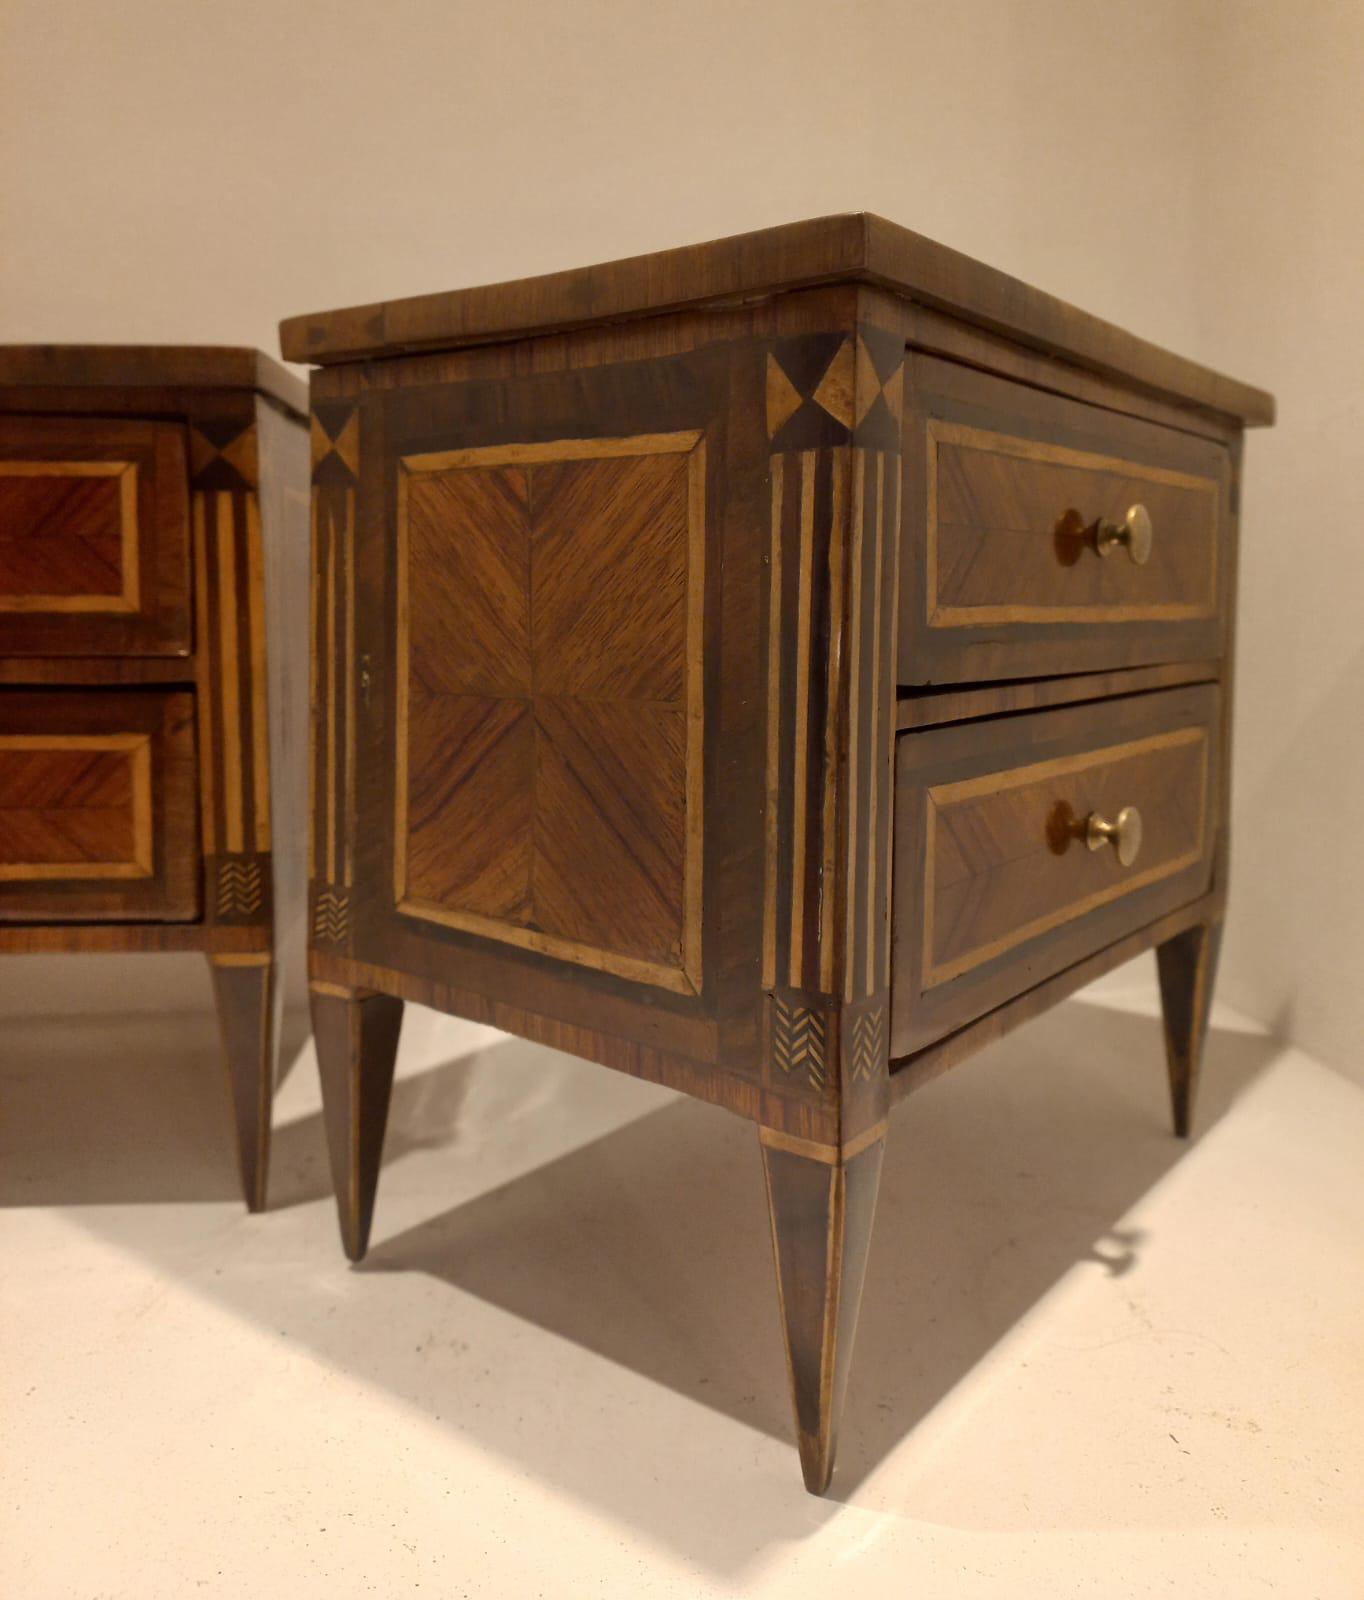 Pair of Louis XVI model chests of drawers, wood panelled and inlaid, early 19th-century Neapolitan cabinetry, top measures 27x18 cm, height 26 cm.